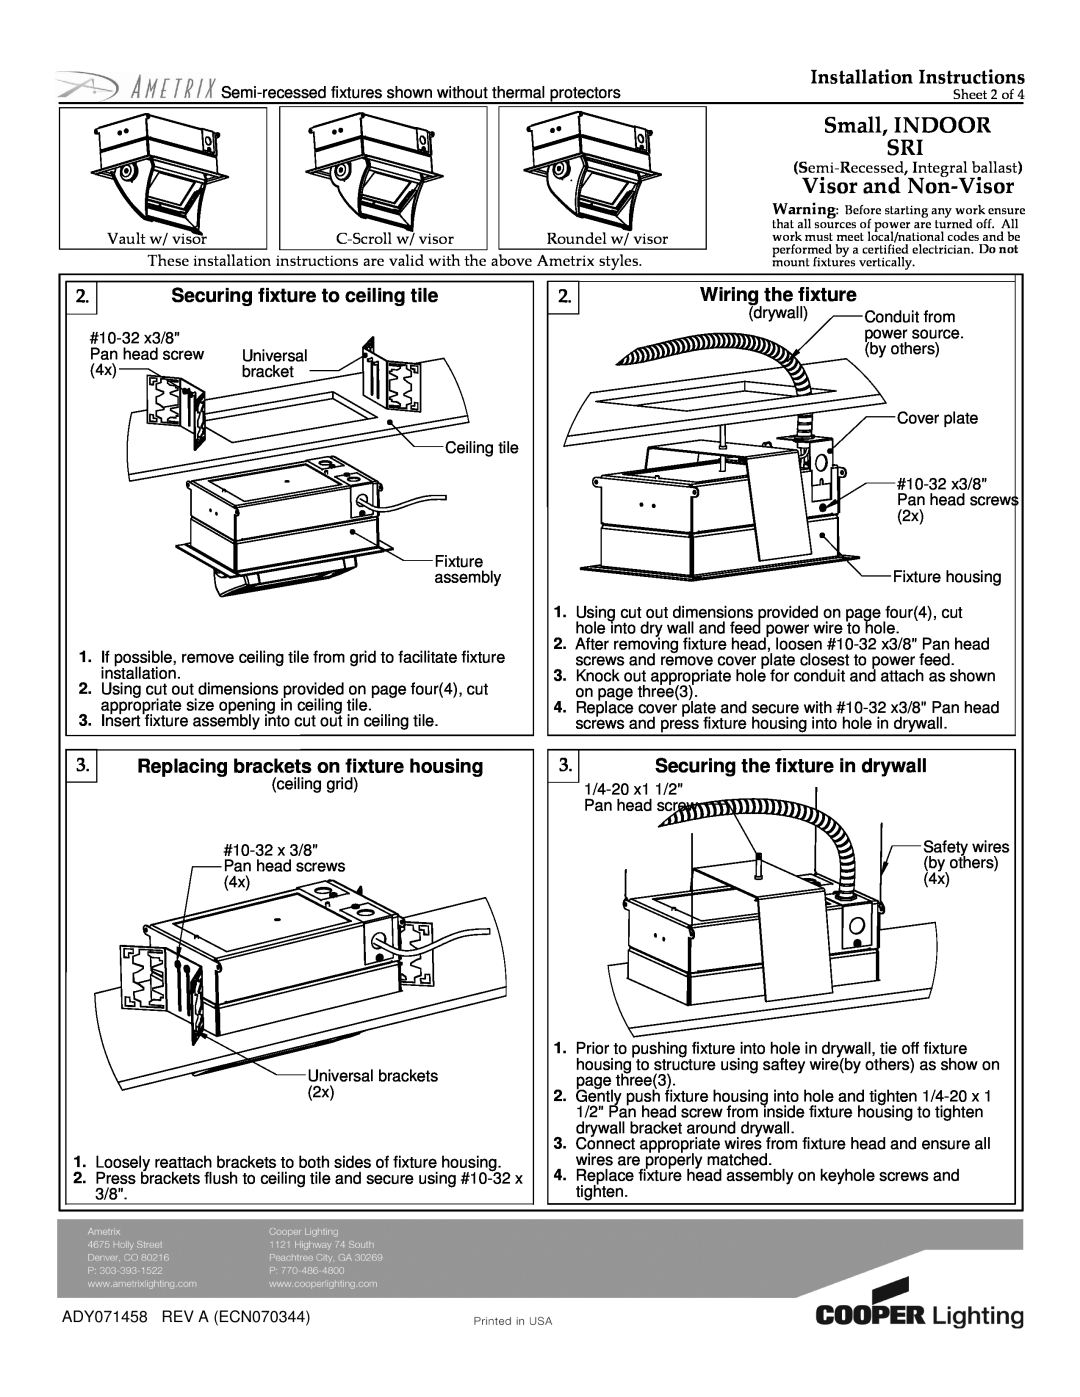 Cooper Lighting ADY071458 manual Small, INDOOR SRI, Visor and Non-Visor, Installation Instructions, Wiring the fixture 